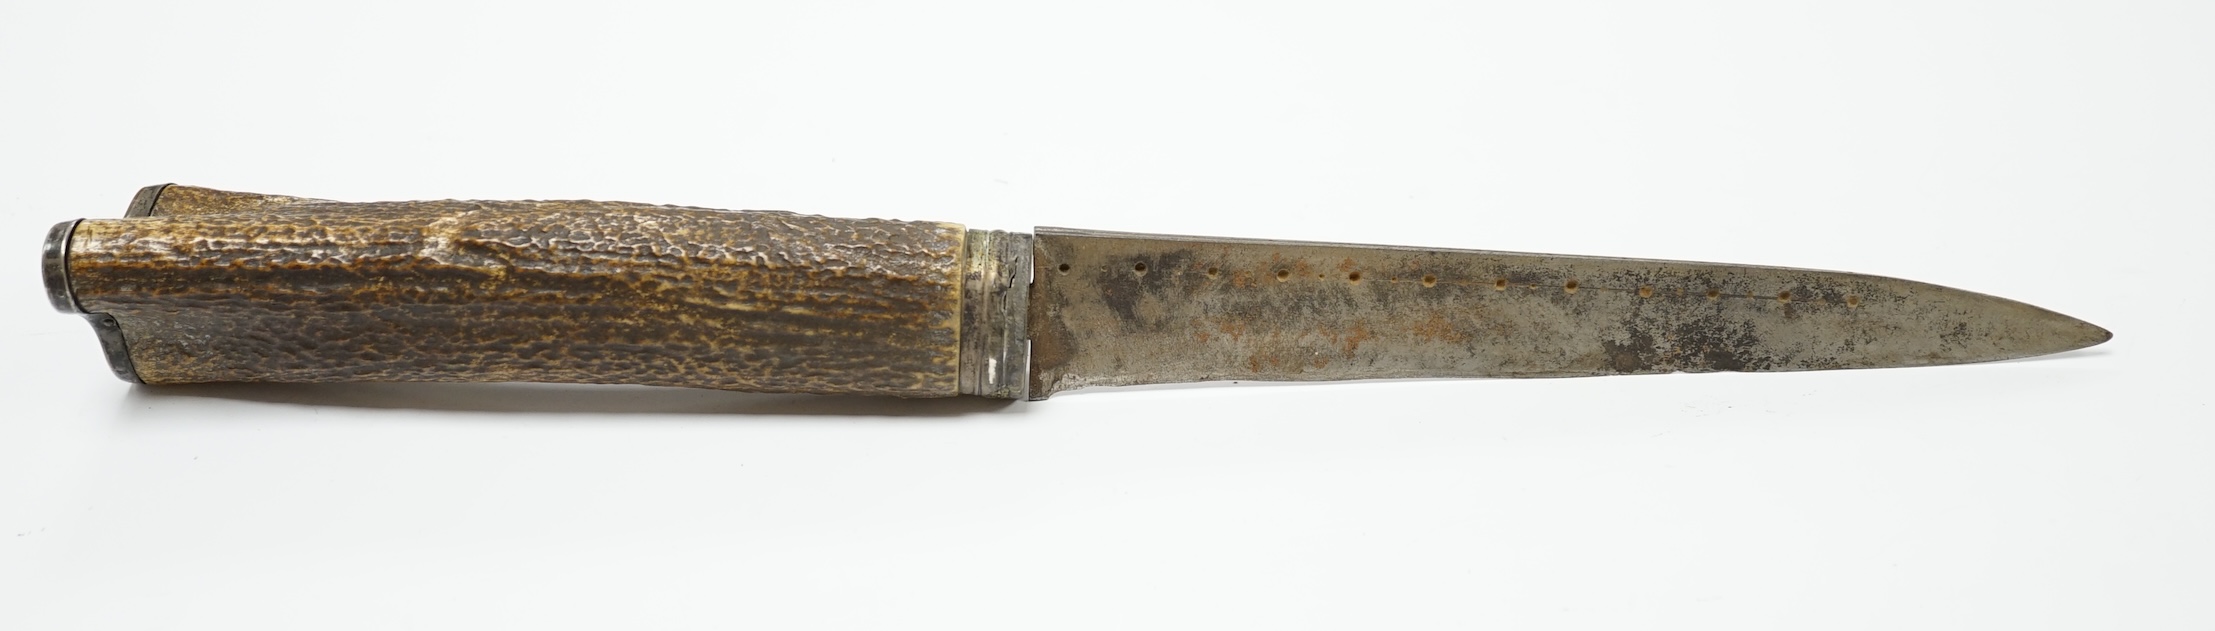 A Scottish dagger c.1900 with silvered mounts, including old initials engraved to pommel and applied to top mount, with deer skin covered sheath and antler grip, blade 19cm.